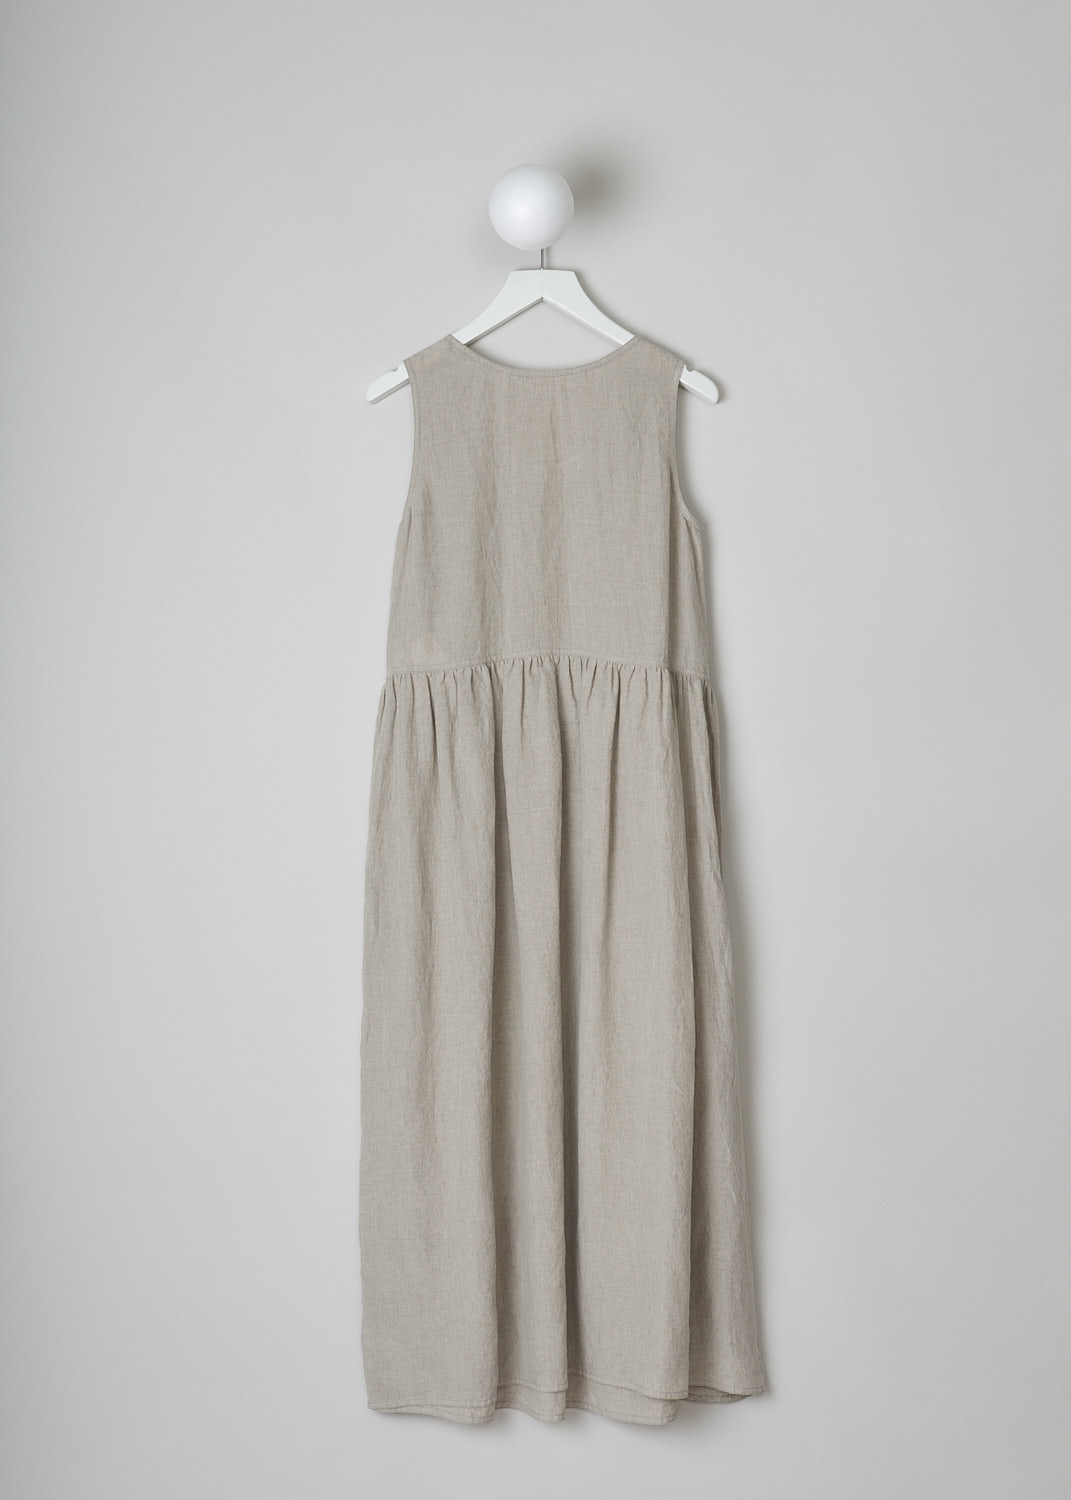 SOFIE D’HOORE, BEIGE LINEN DRESS, DANDLE_LIFE_NATURAL, Beige, Grey, Back, This beige sleeveless dress has U-neckline. The dress has a wide A-line silhouette. A straight crystal pleated hemline separates the bodice from the midi length skirt. Concealed slanted pockets can be found in the side seam. 
